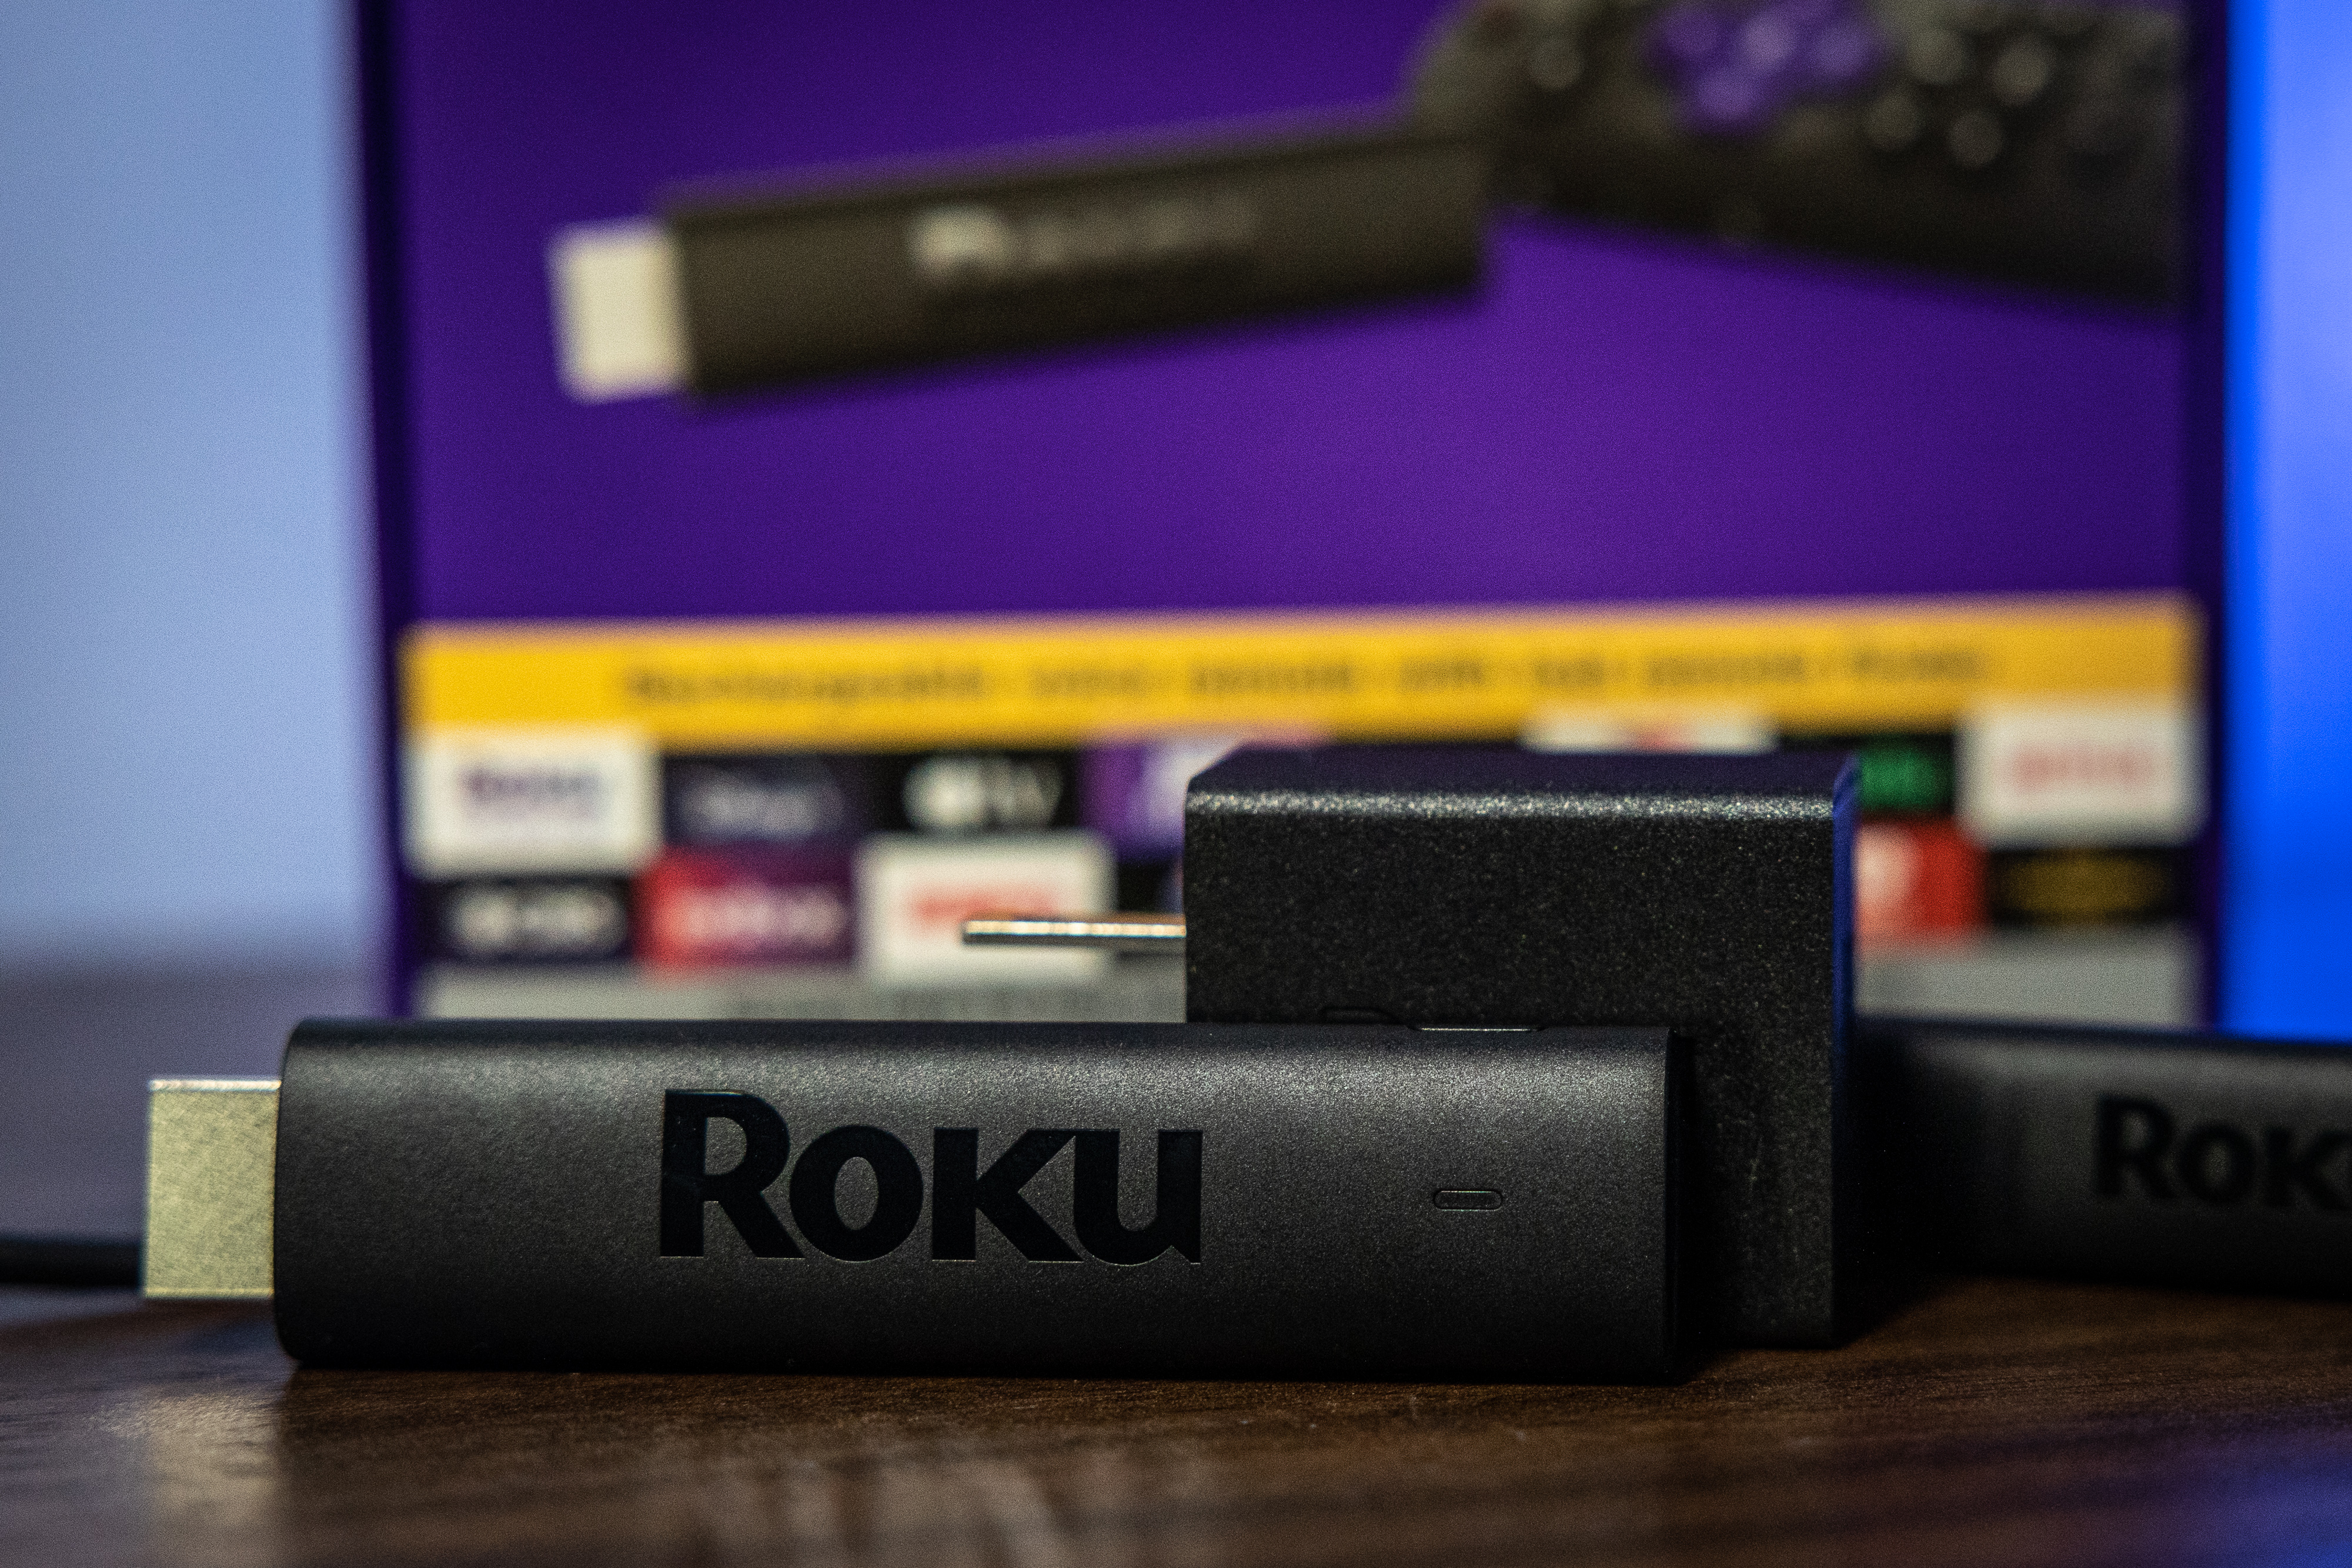 Roku Streaming Stick Plus review: Still a great 4K HDR streamer